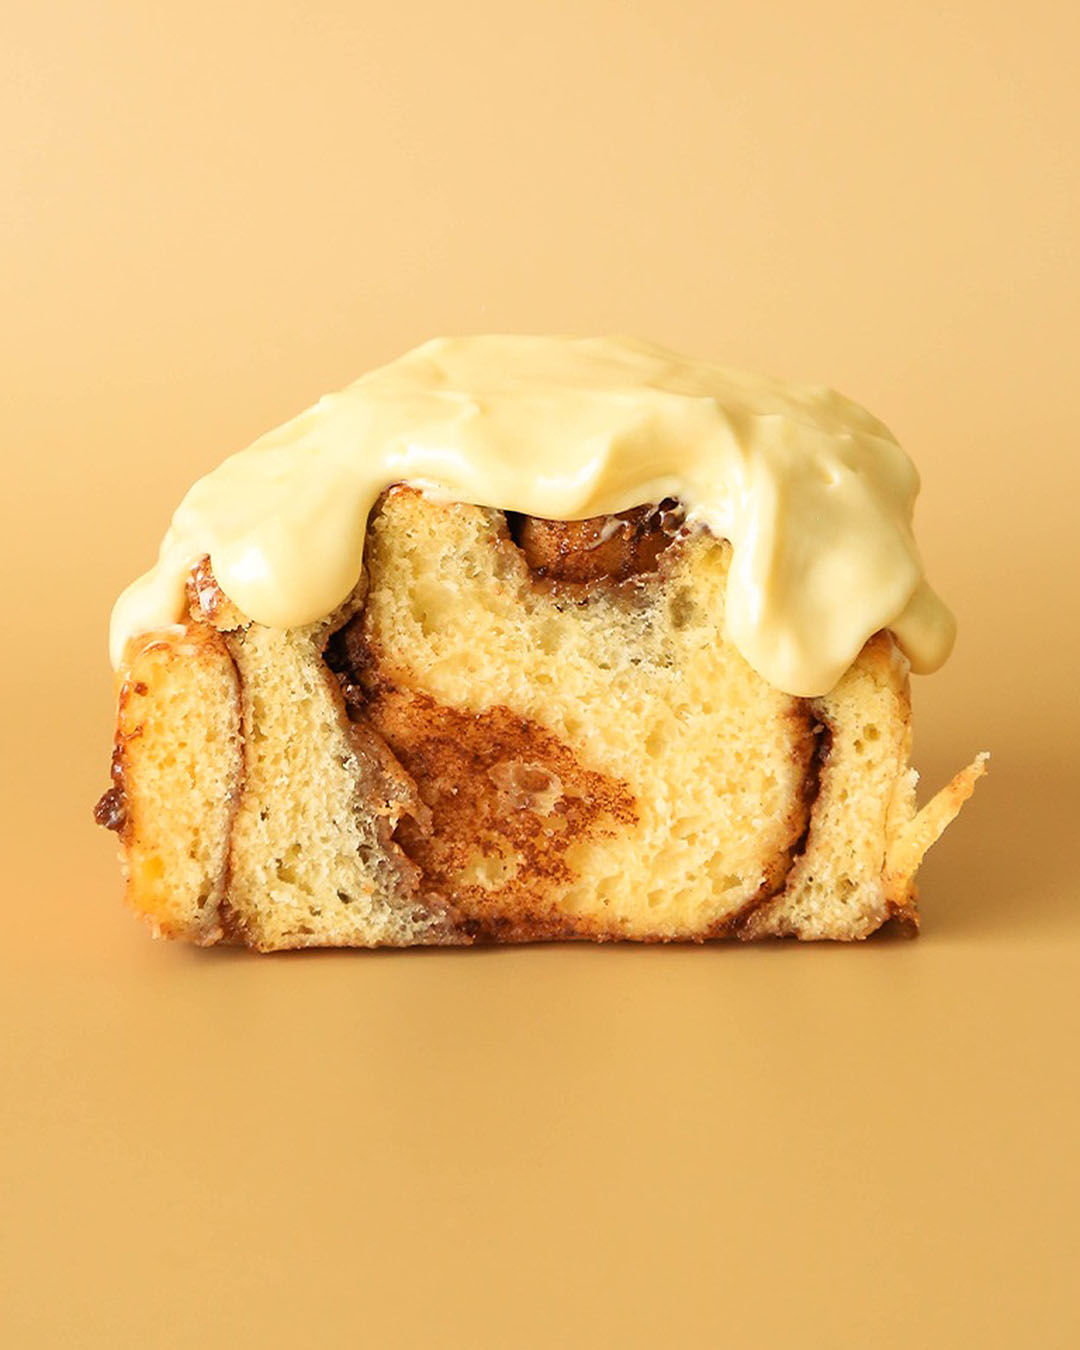 The cinnamon bun from Butter Baby.